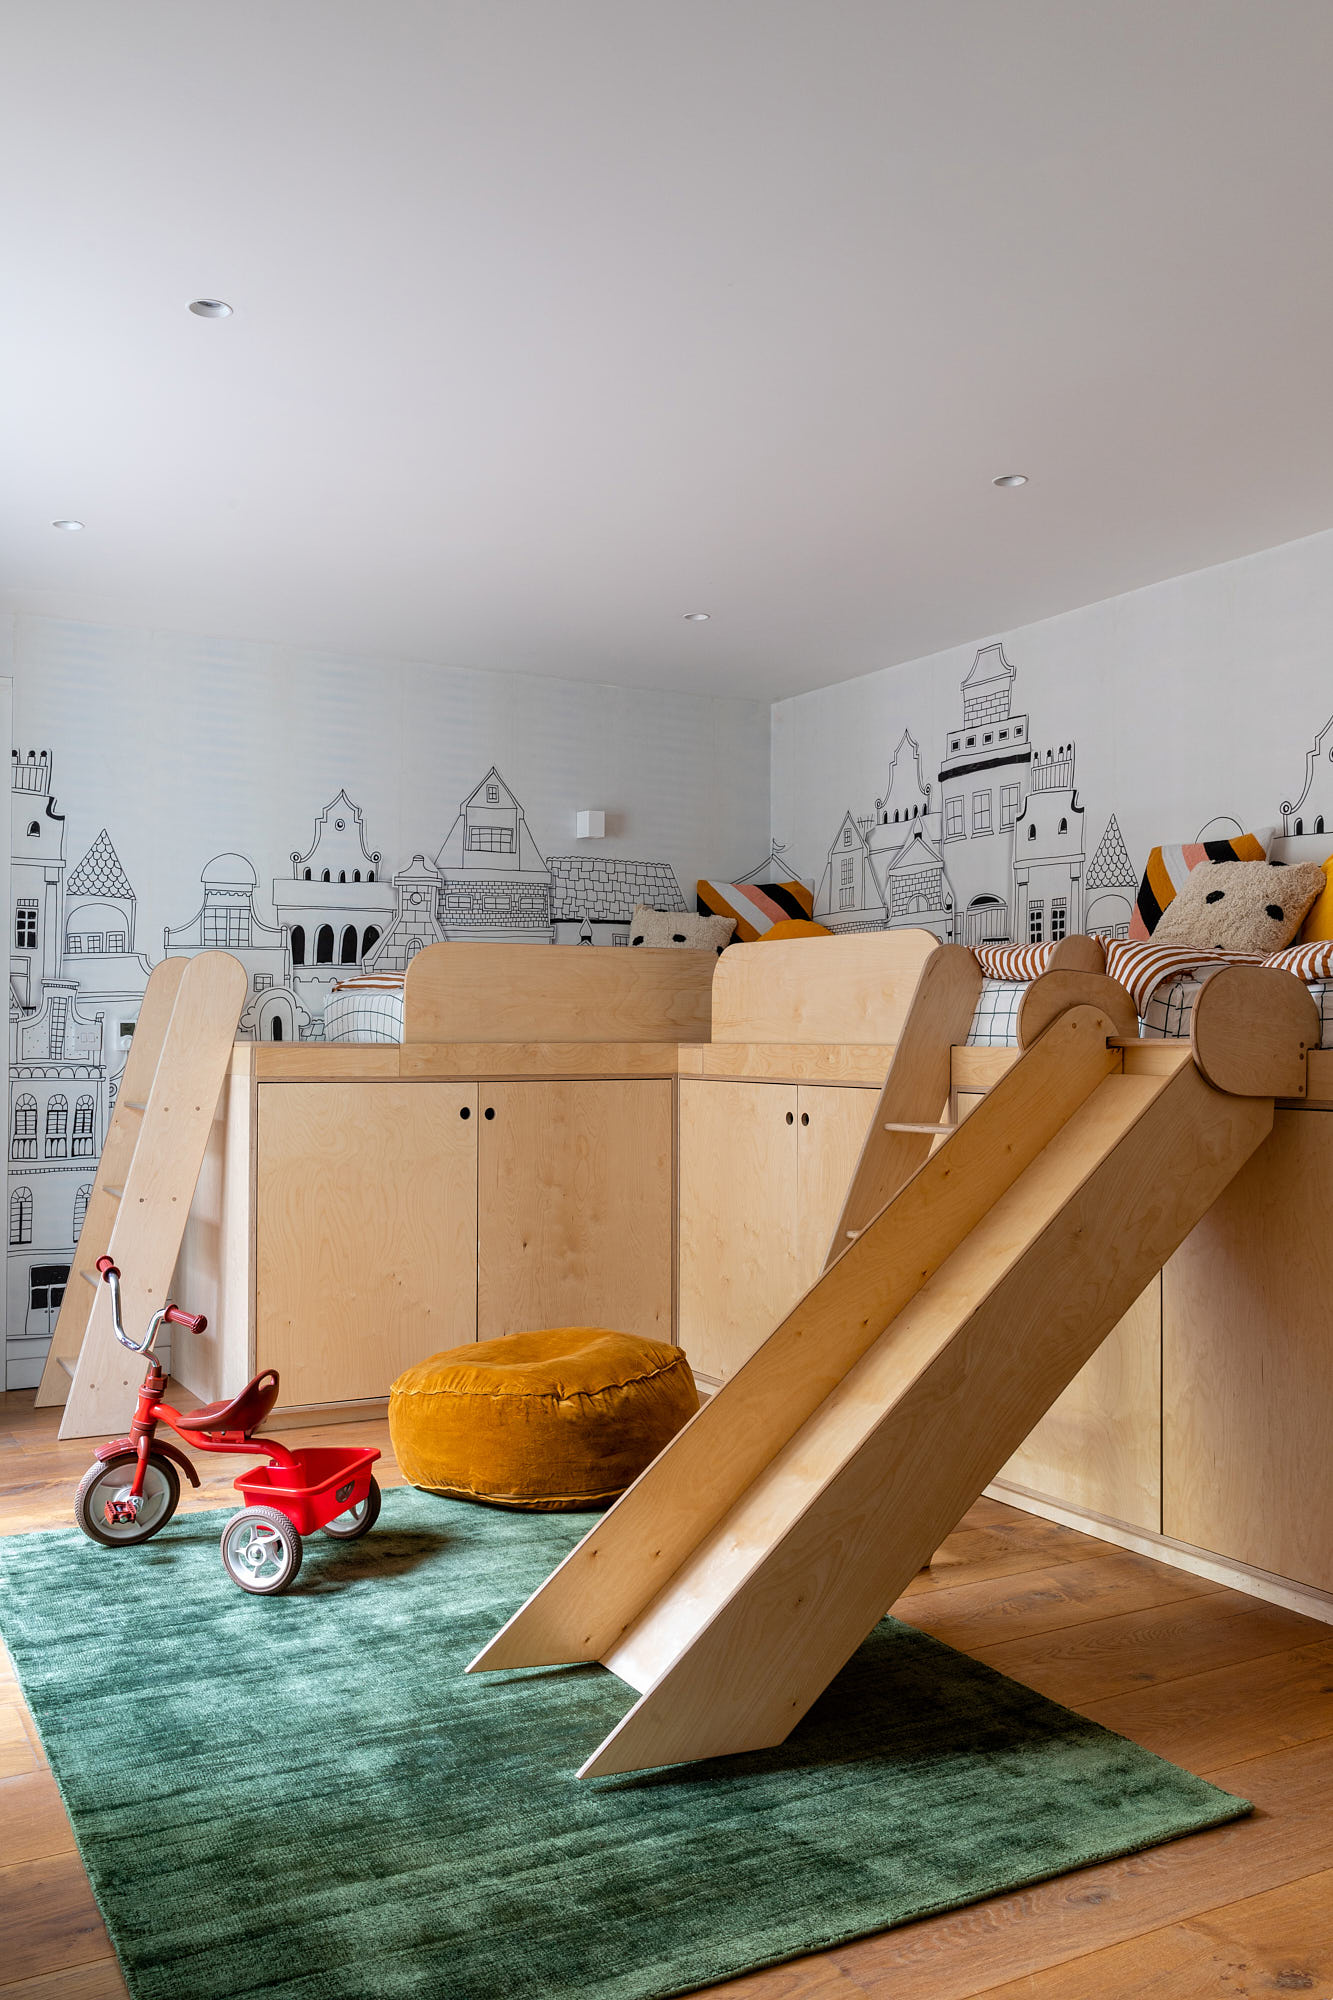 wooden slide in a playroom